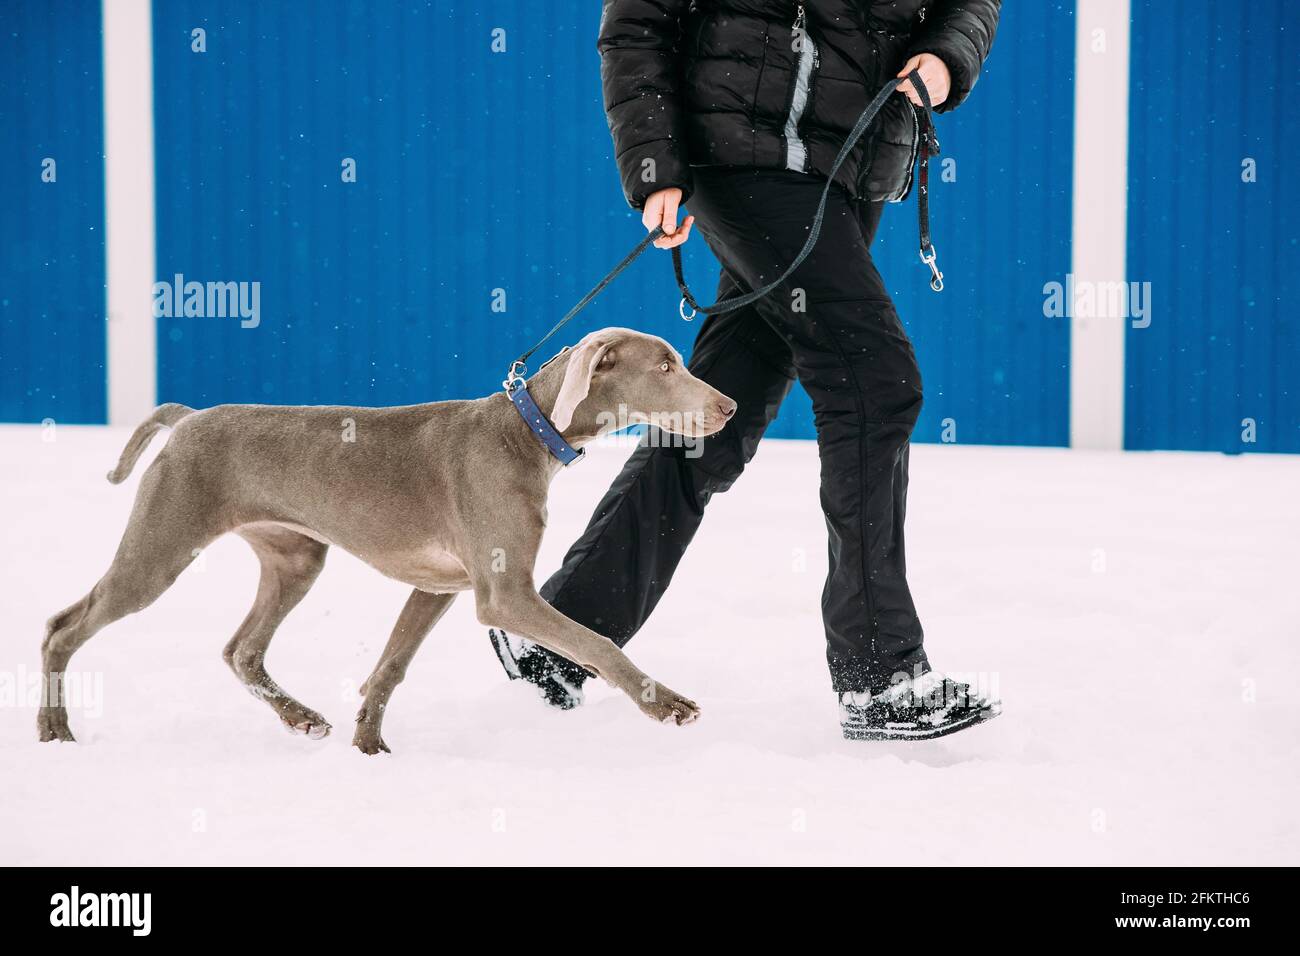 Weimaraner Dog Walking Near Human In Snow At Winter Day. Large Dog Breds For Hunting. The Weimaraner Is An All-purpose Gun Dog. Stock Photo